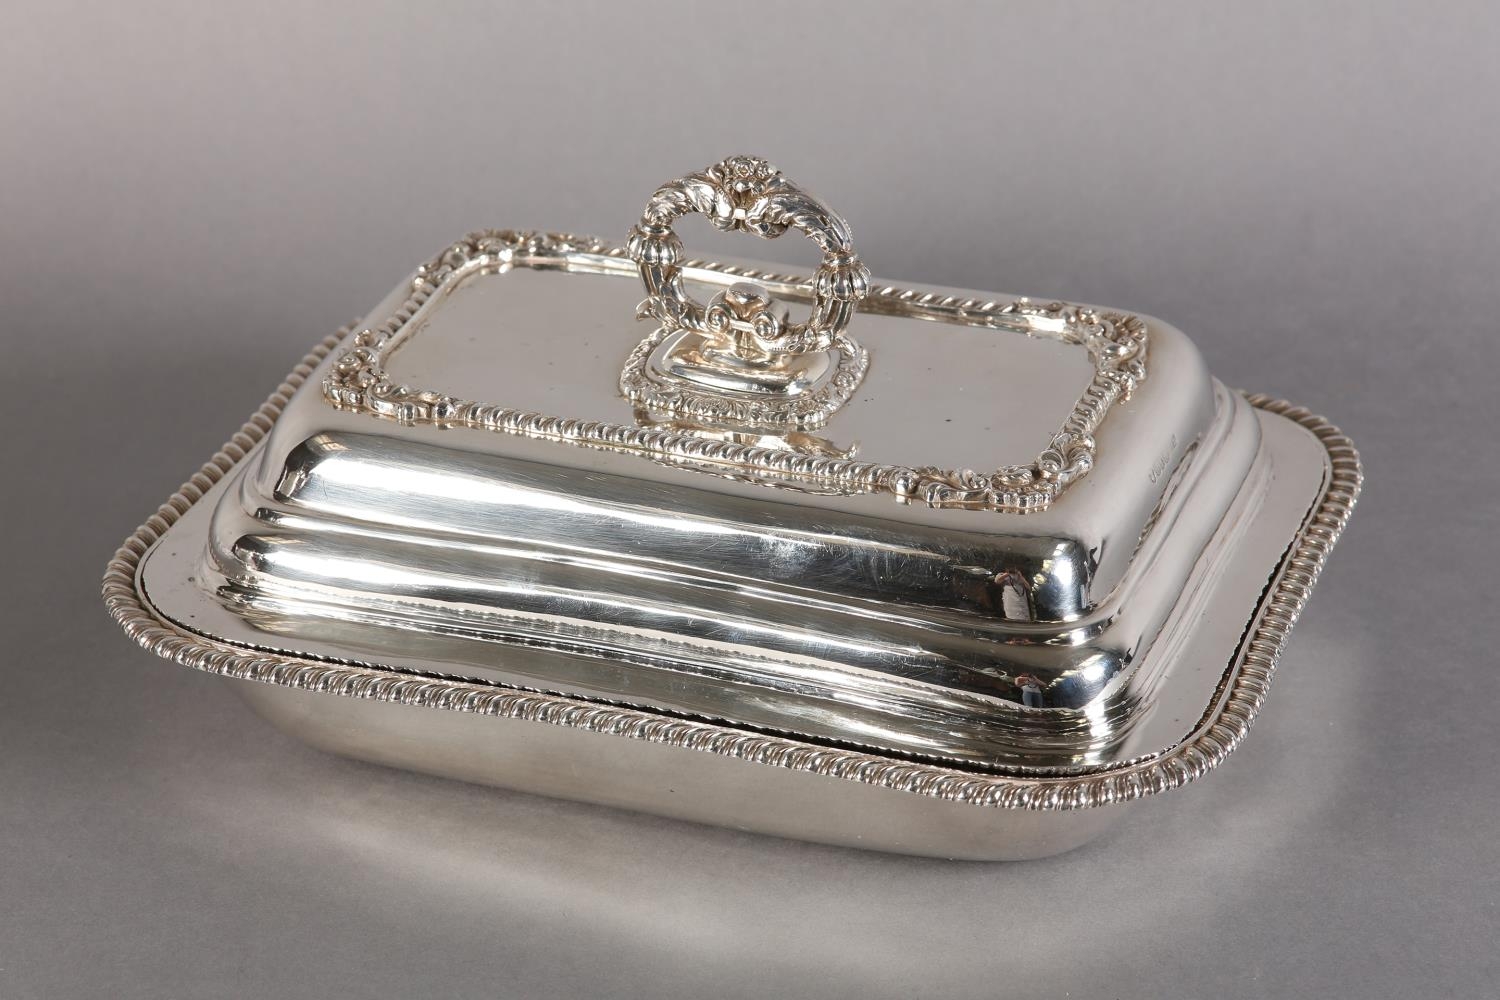 A GEORGE III SILVER ENTRÉE DISH AND COVER, London 1816, Solomon Hougham, rectangular with gadroon